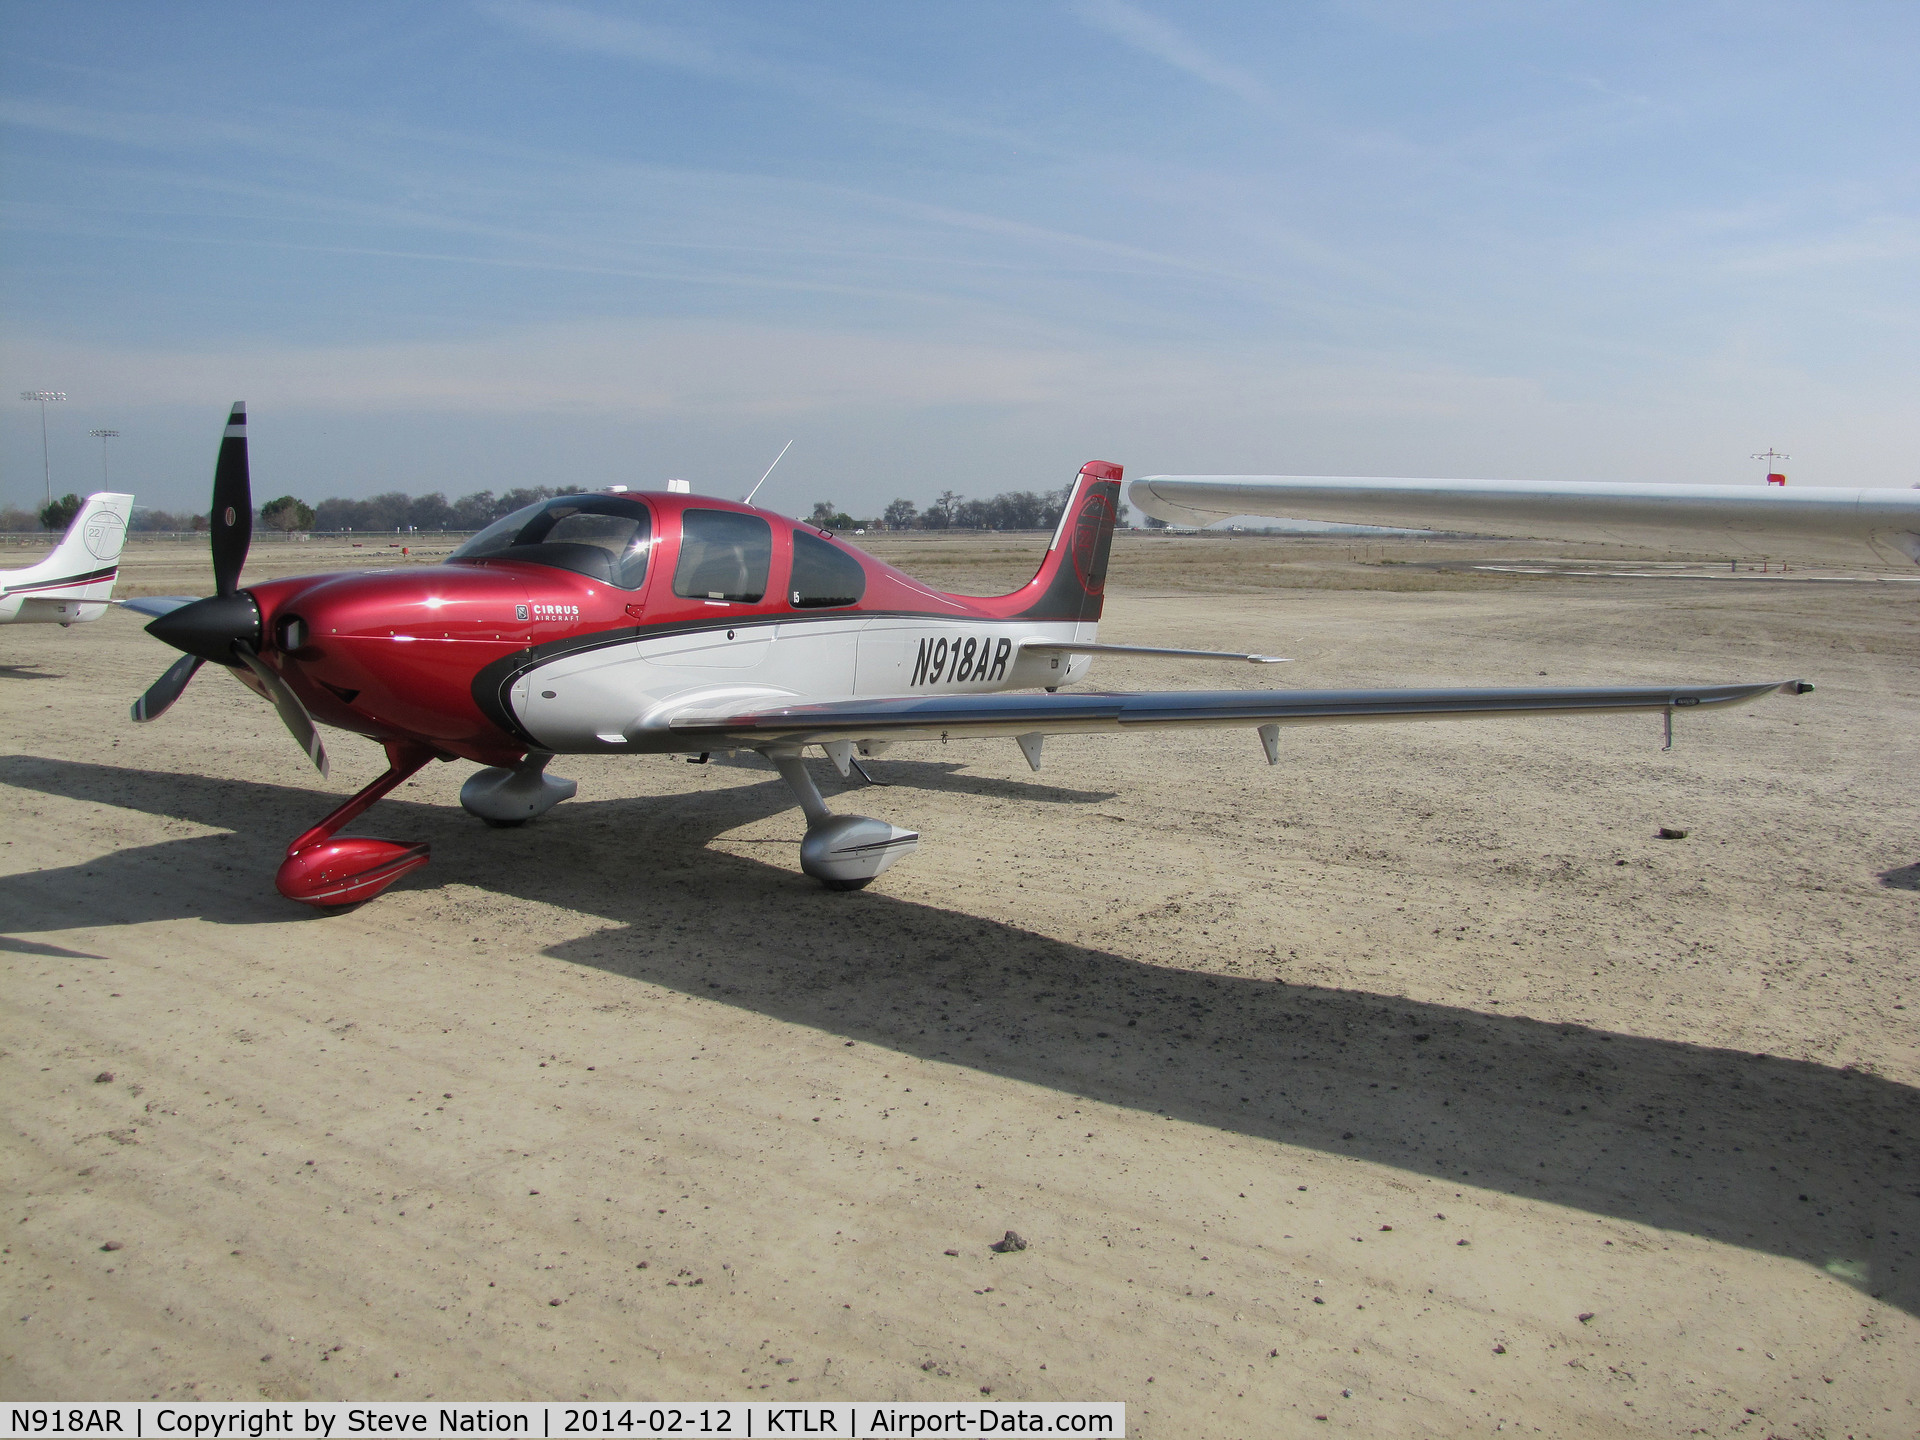 N918AR, 2013 Cirrus SR22T C/N 0610, Excelsior Metals Inc. Cirrus Design SR22T from Fresno, CA @ Mefford Field (Tulare, CA) for 2014 International Ag Expo